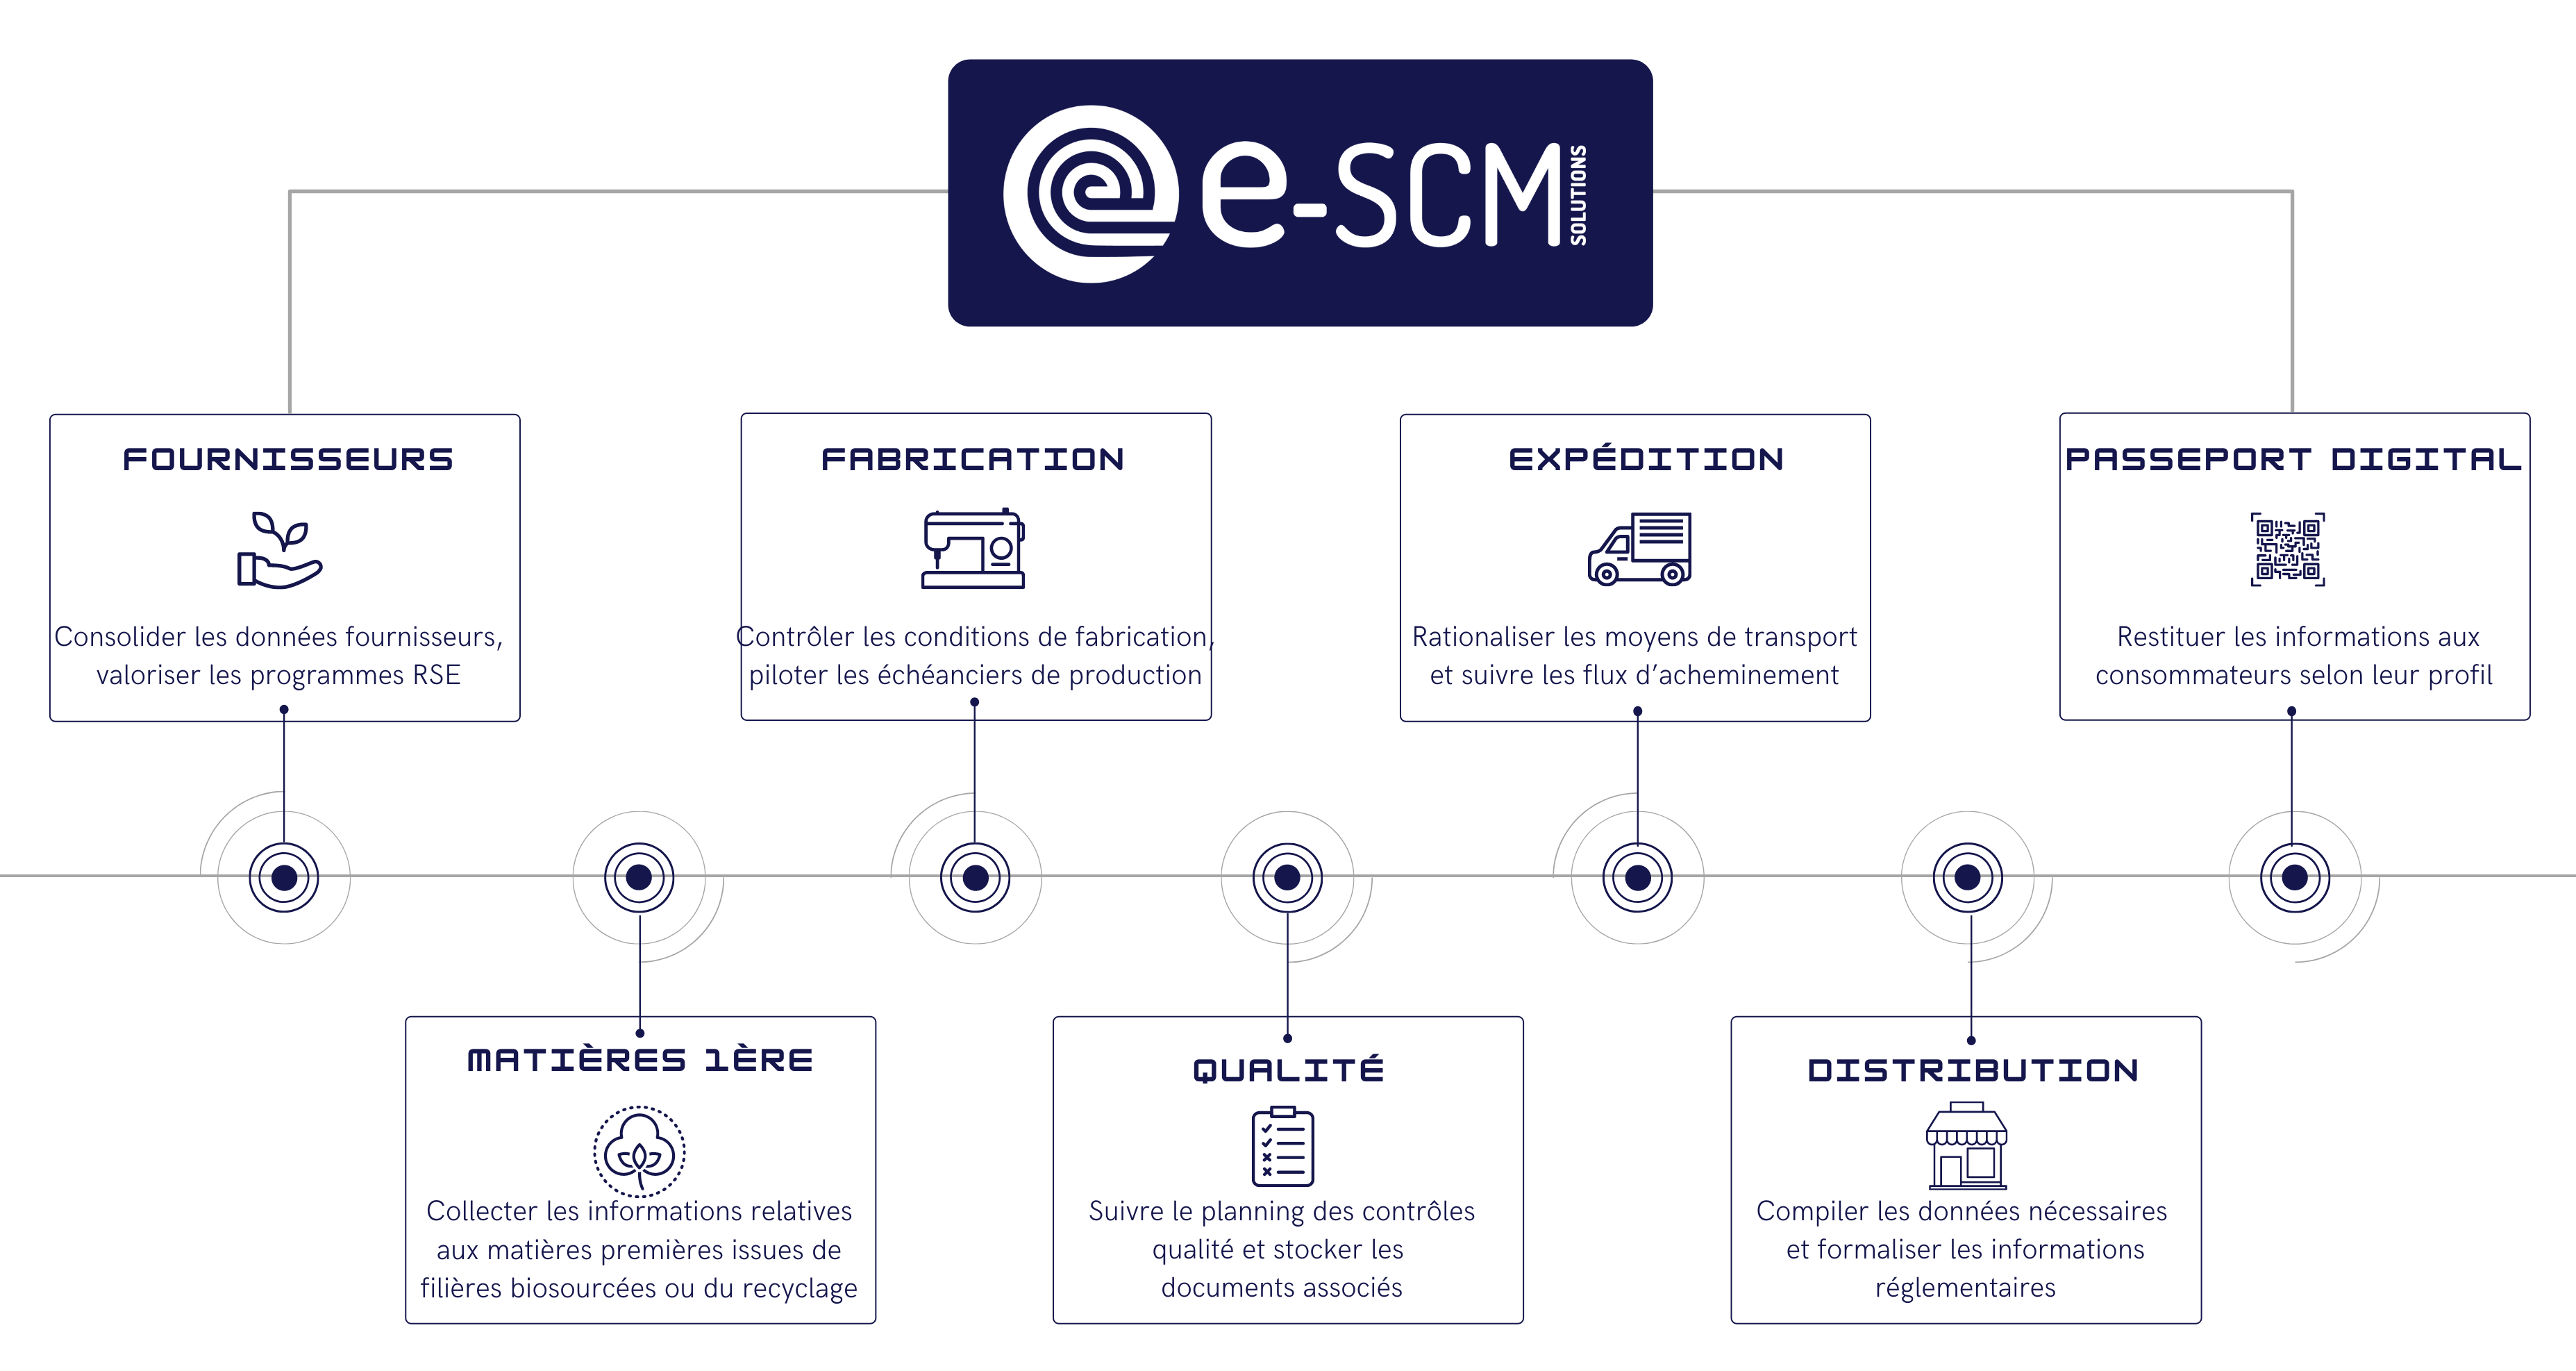 e-SCM Solutions - The digital product passport allows, from a unique code generated for each batch of finished product, to access all or part of the traceability data at the finest level (or SKU).